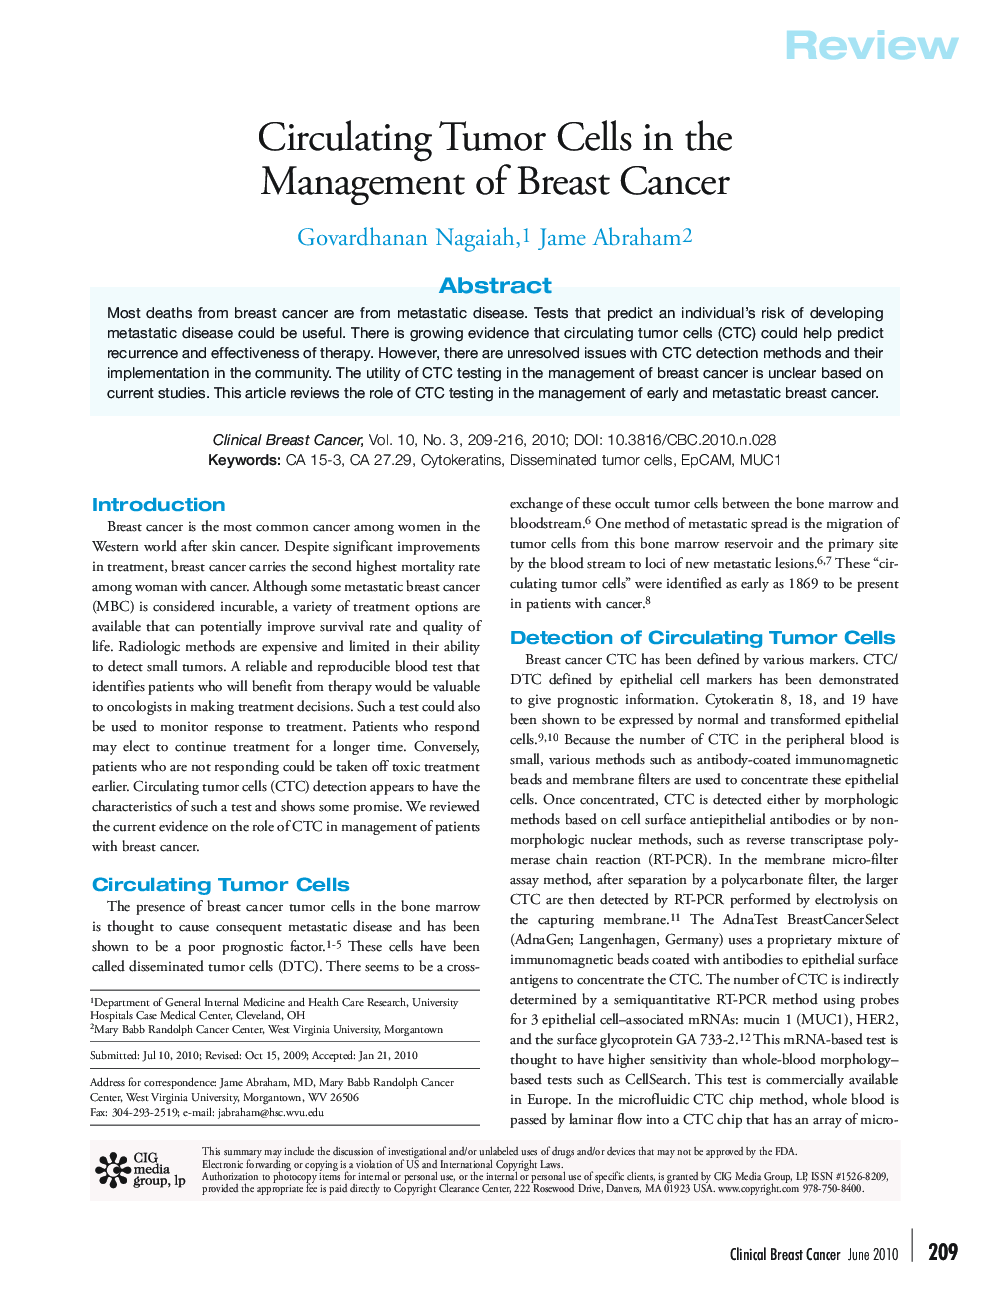 Circulating Tumor Cells in the Management of Breast Cancer 